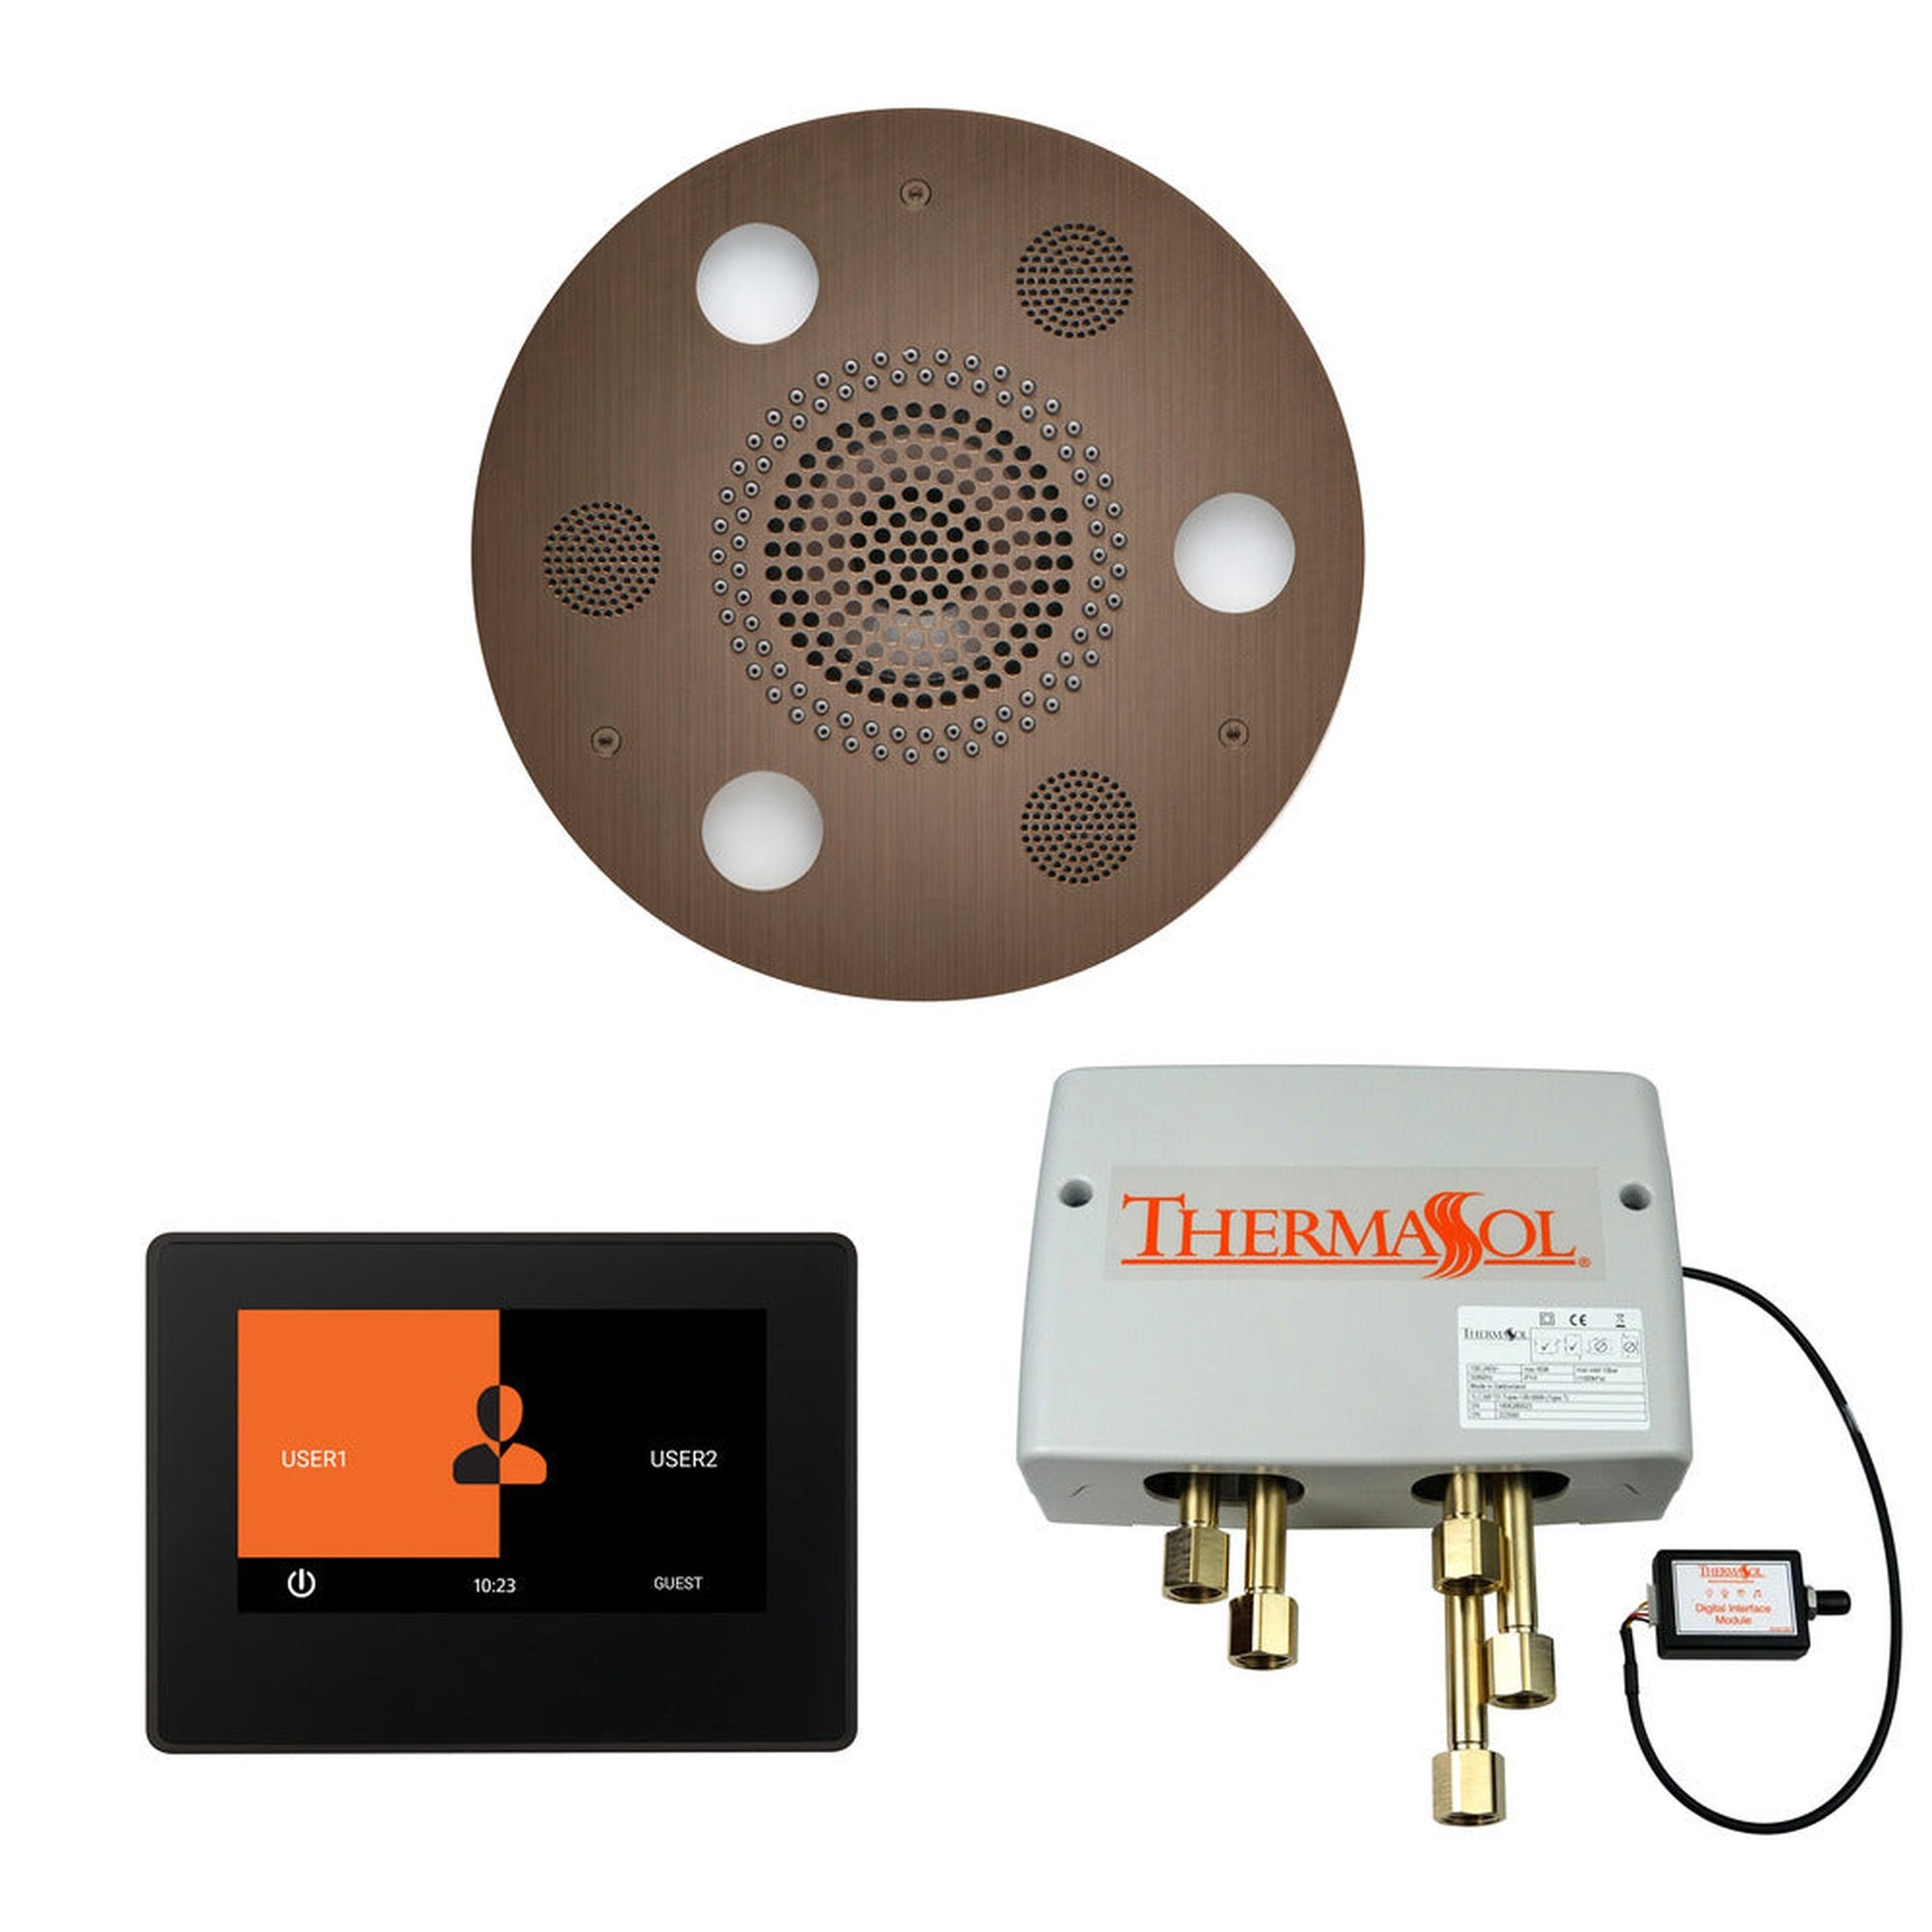 ThermaSol The Wellness Antique Copper Finish Serenity Advancedd Round Shower Package with 7" ThermaTouch